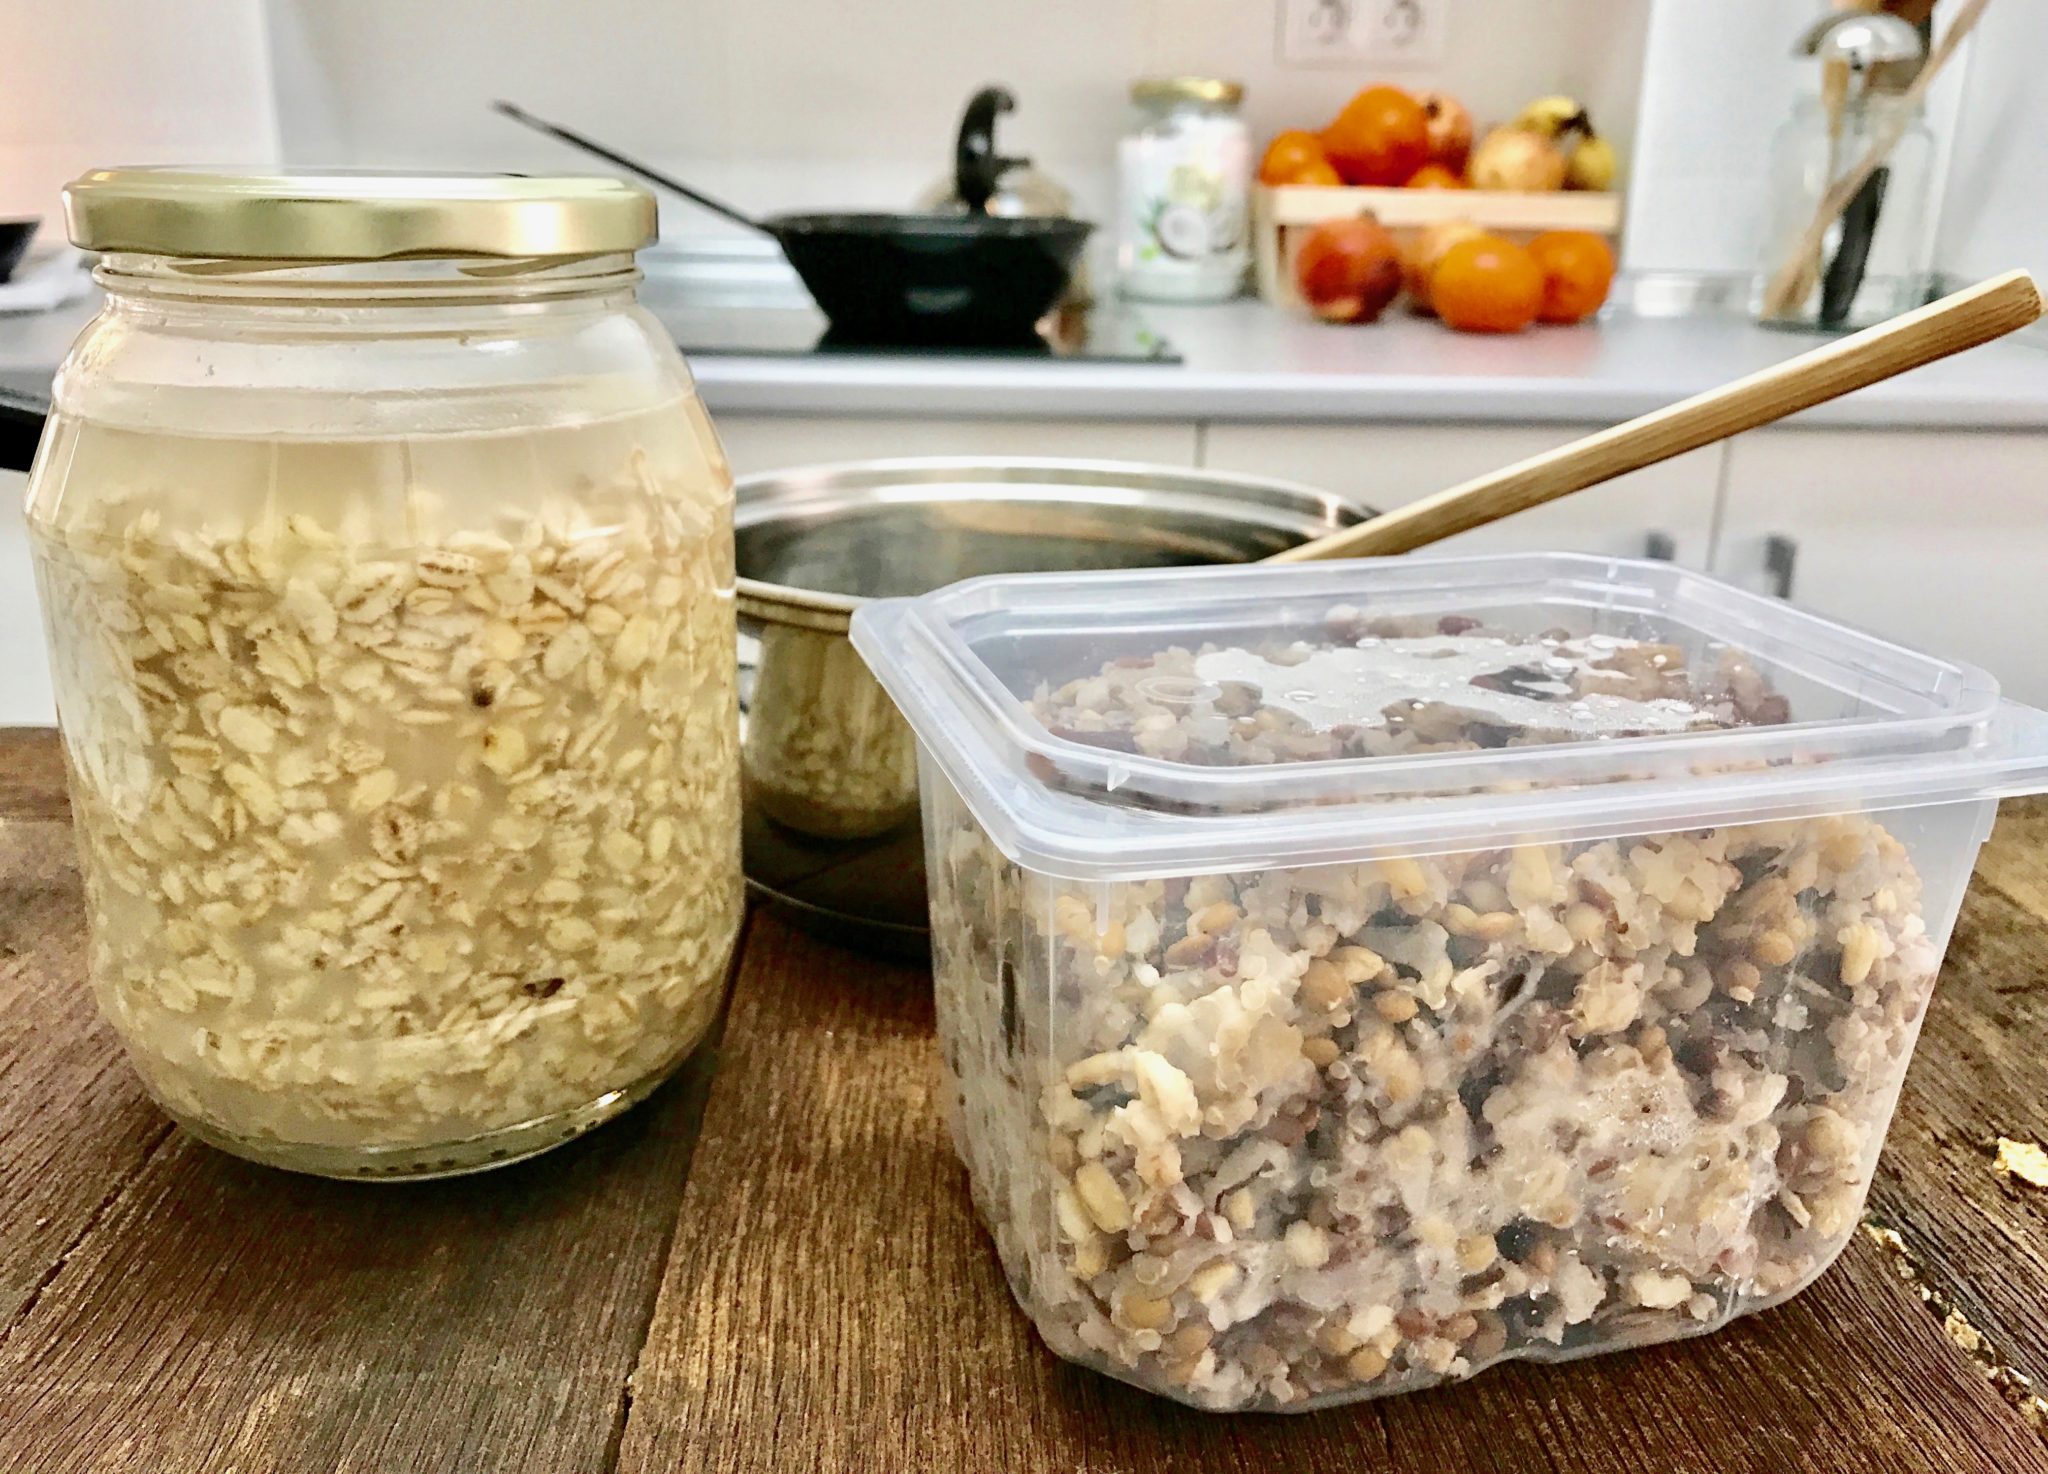 prepared feremented-cooked whole grains and soaked rolled oats & barley flakes